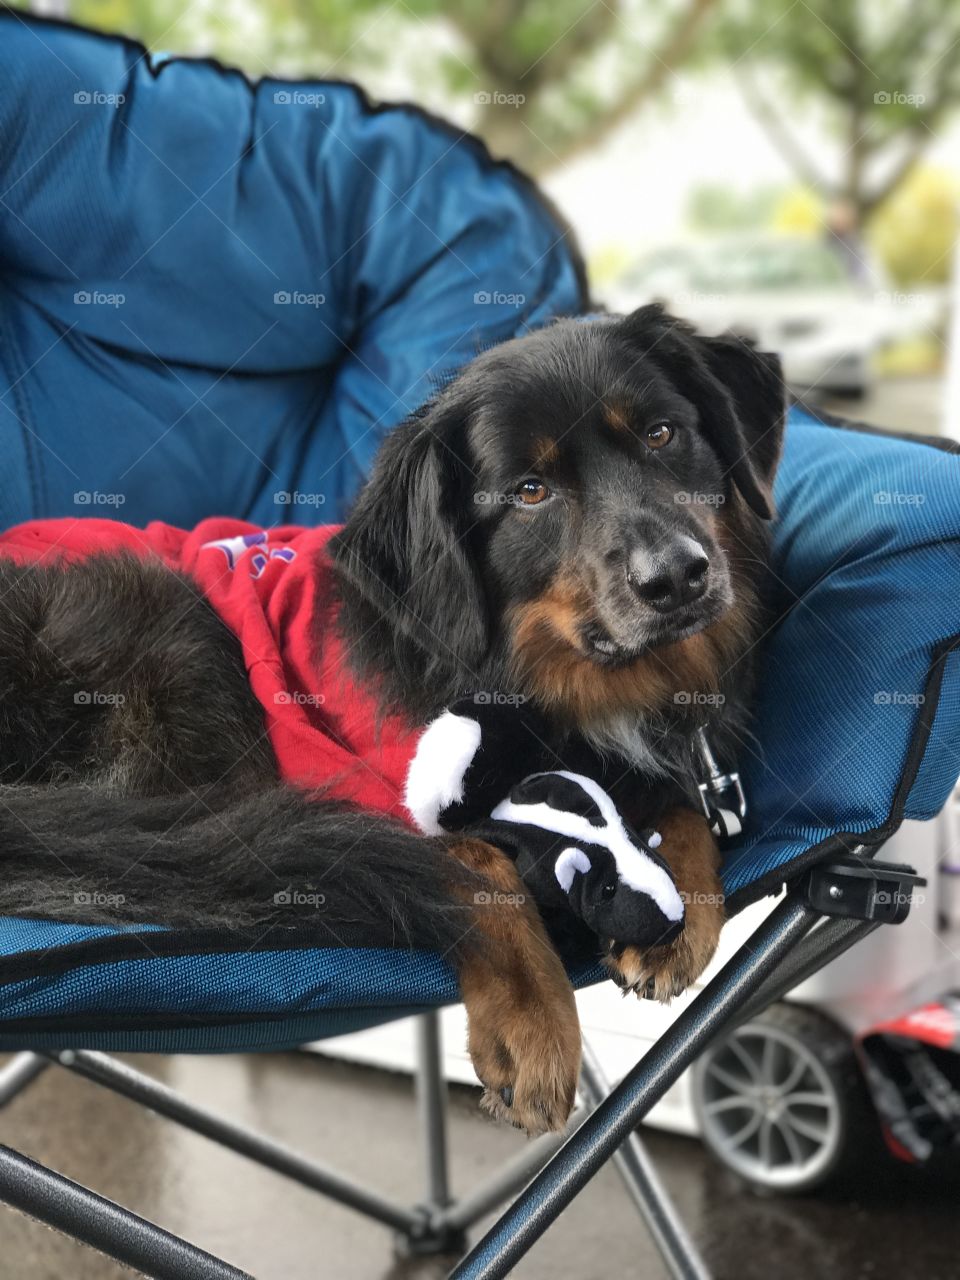 Just a dog wearing a shirt laying in a lounge chair with his stuffed animal skunk ❤️